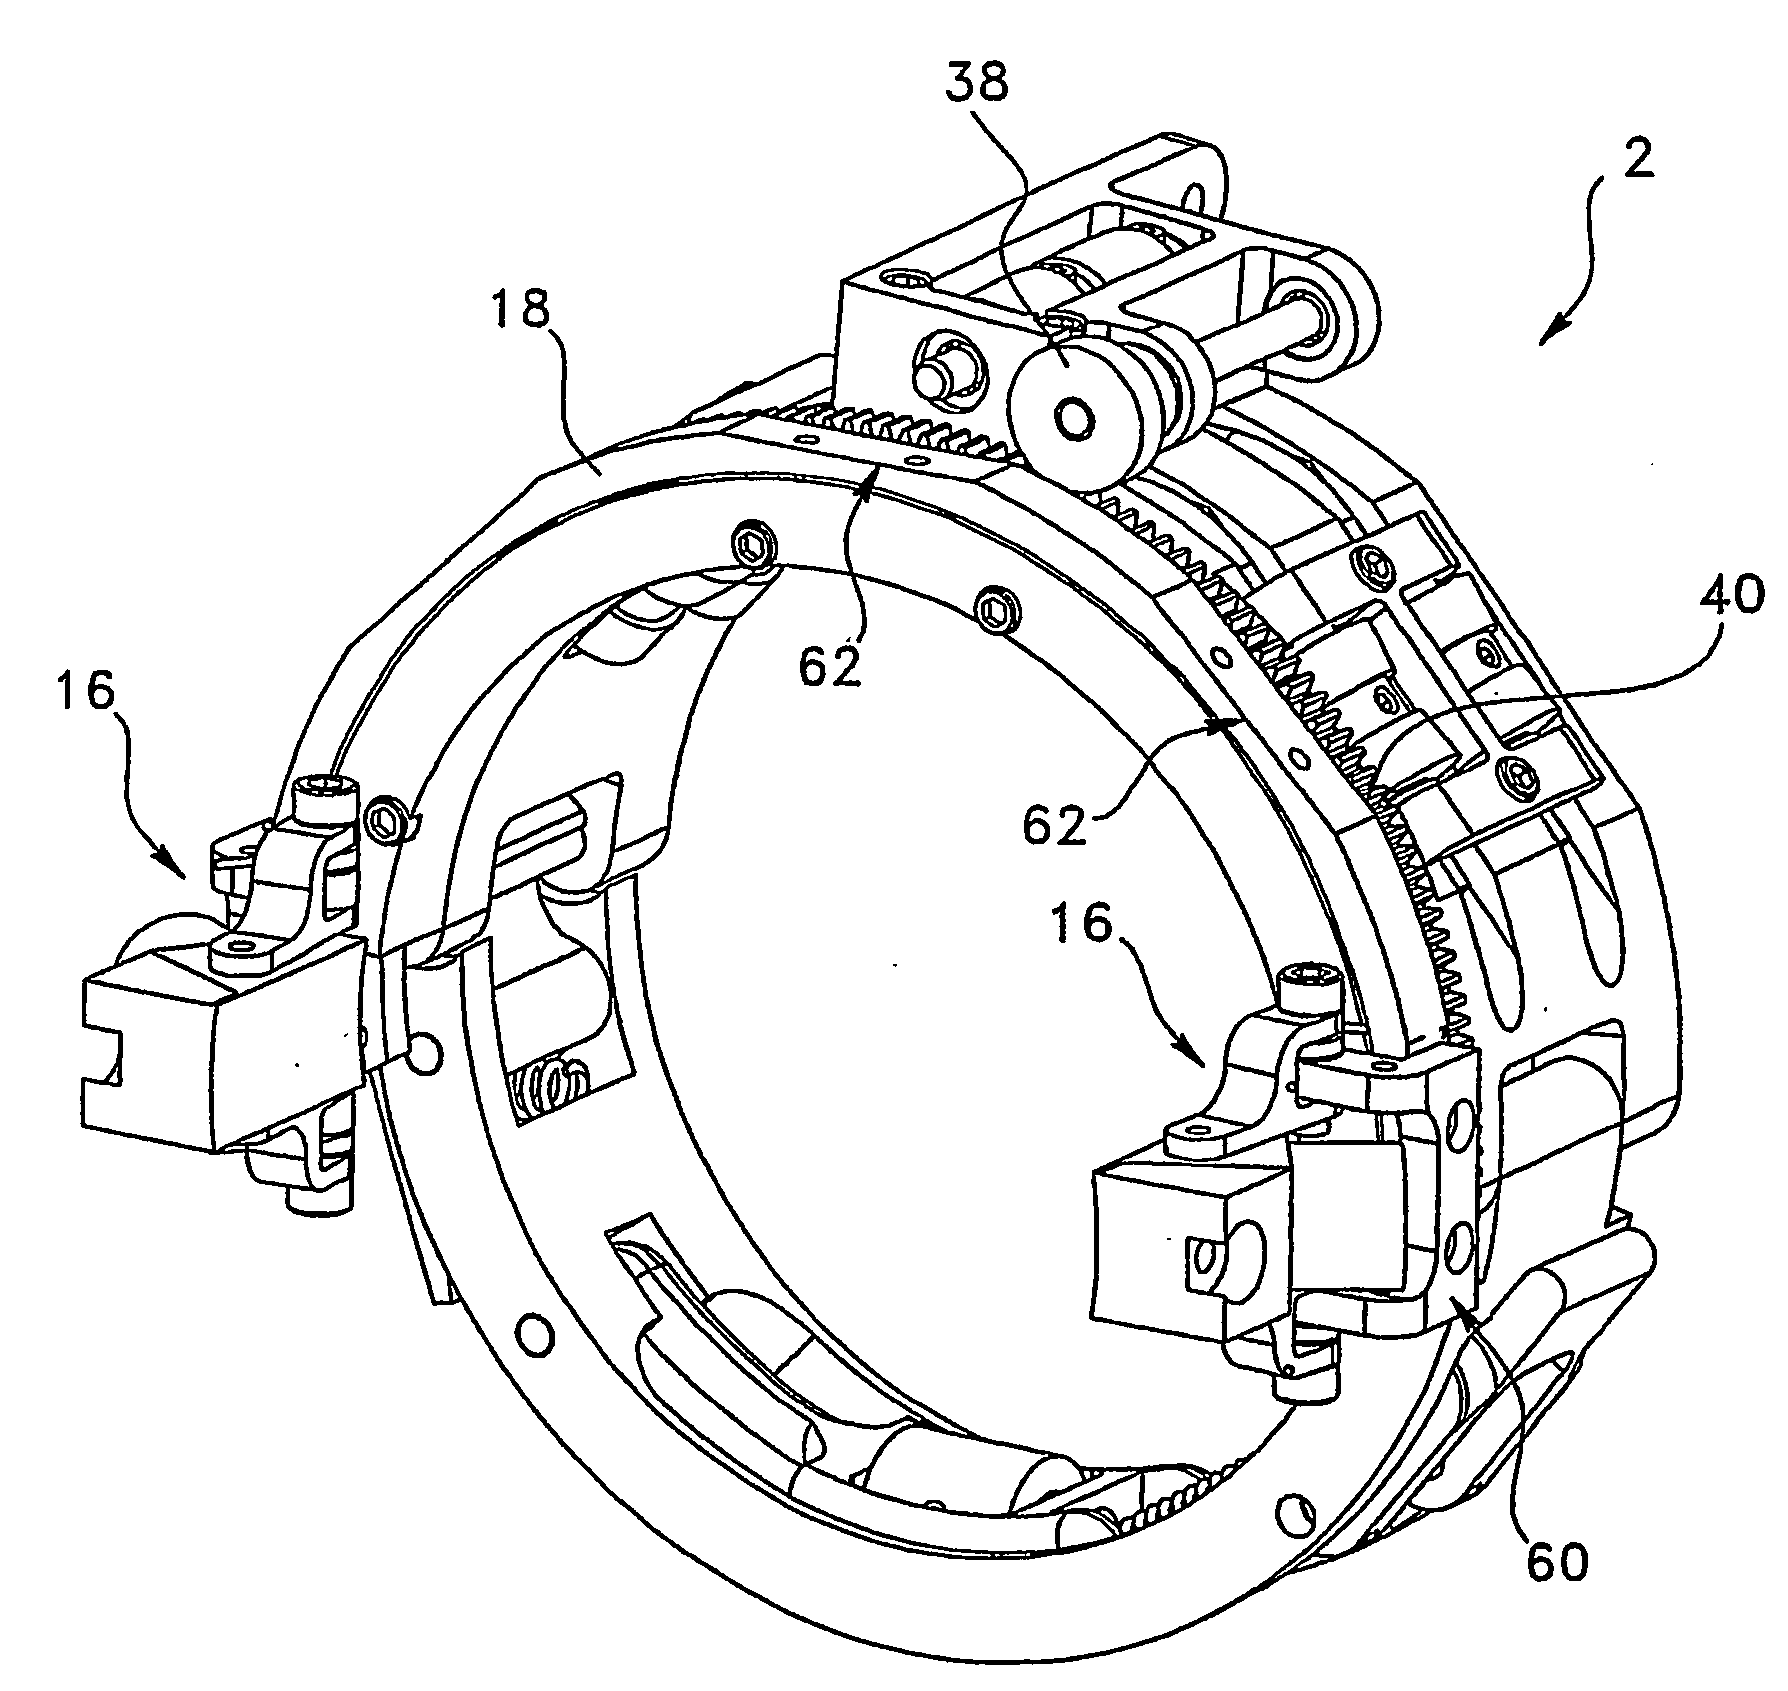 Motorized bracelet assembly for moving sensor modules around a pipe